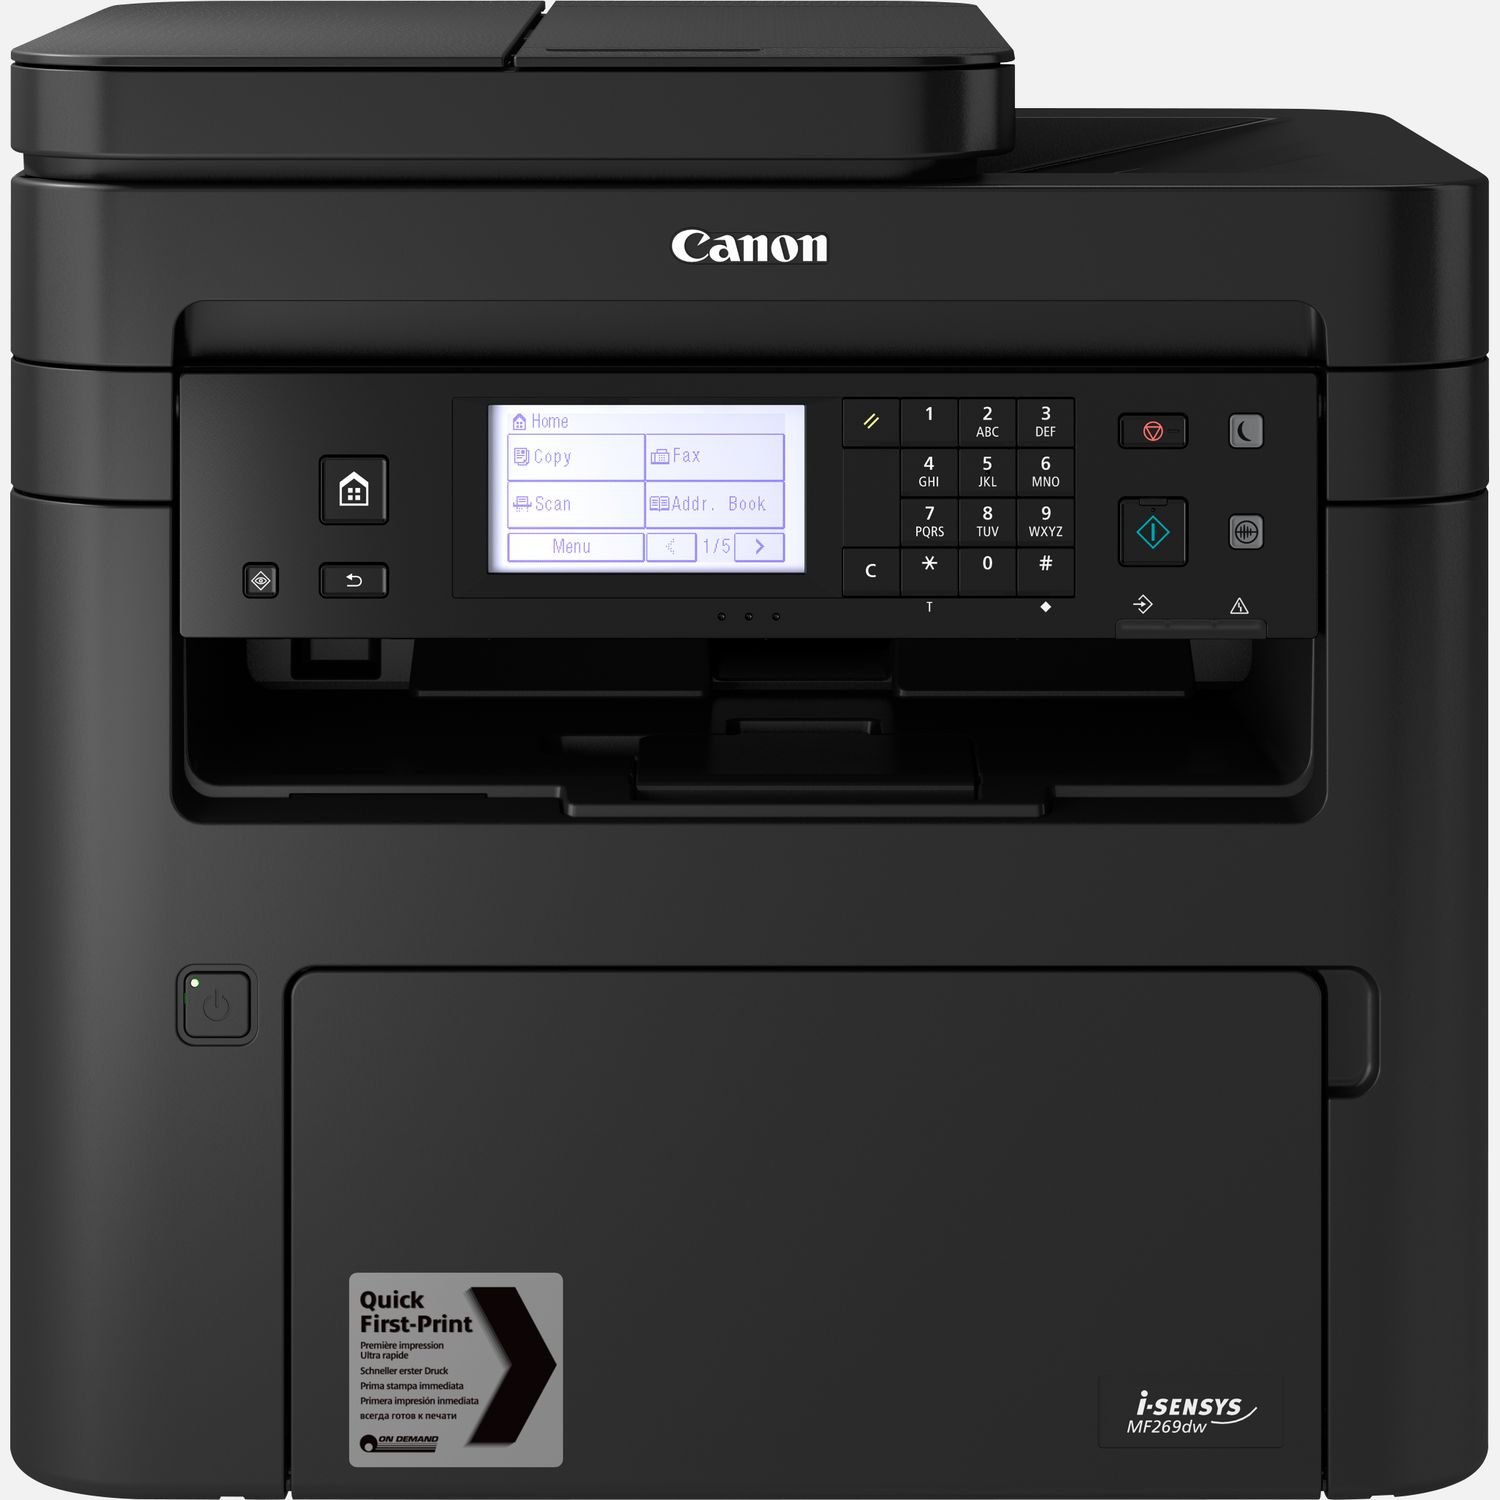 Buy Canon i-SENSYS MF269dw All-in-one Mono Laser Printer in Discontinued â Canon Sweden Store